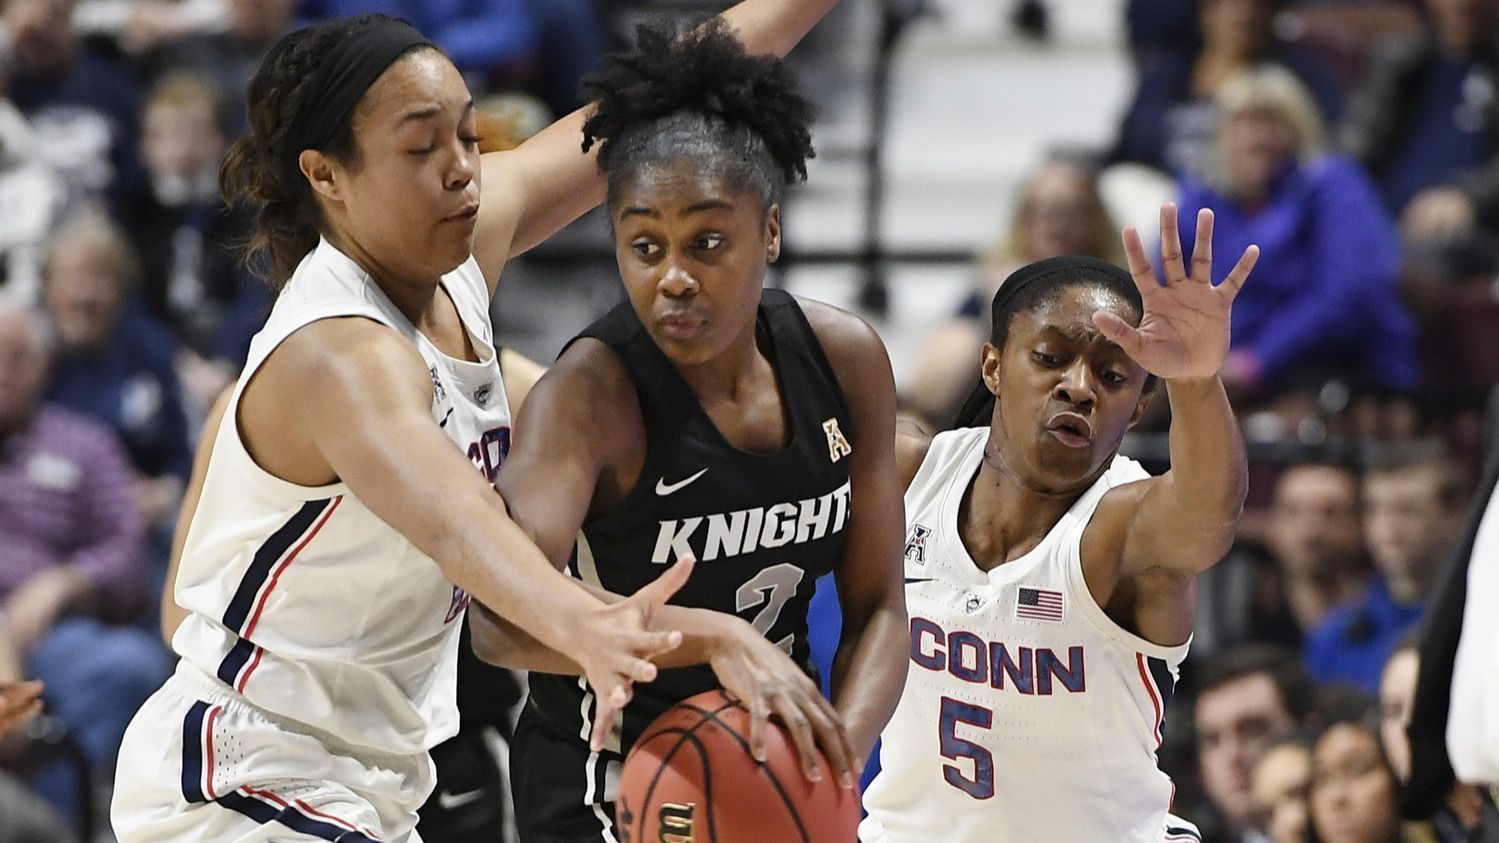 Ucf Womens Basketball Suffers 66 45 Loss To No 2 Uconn In Aac Title Game Orlando Sentinel